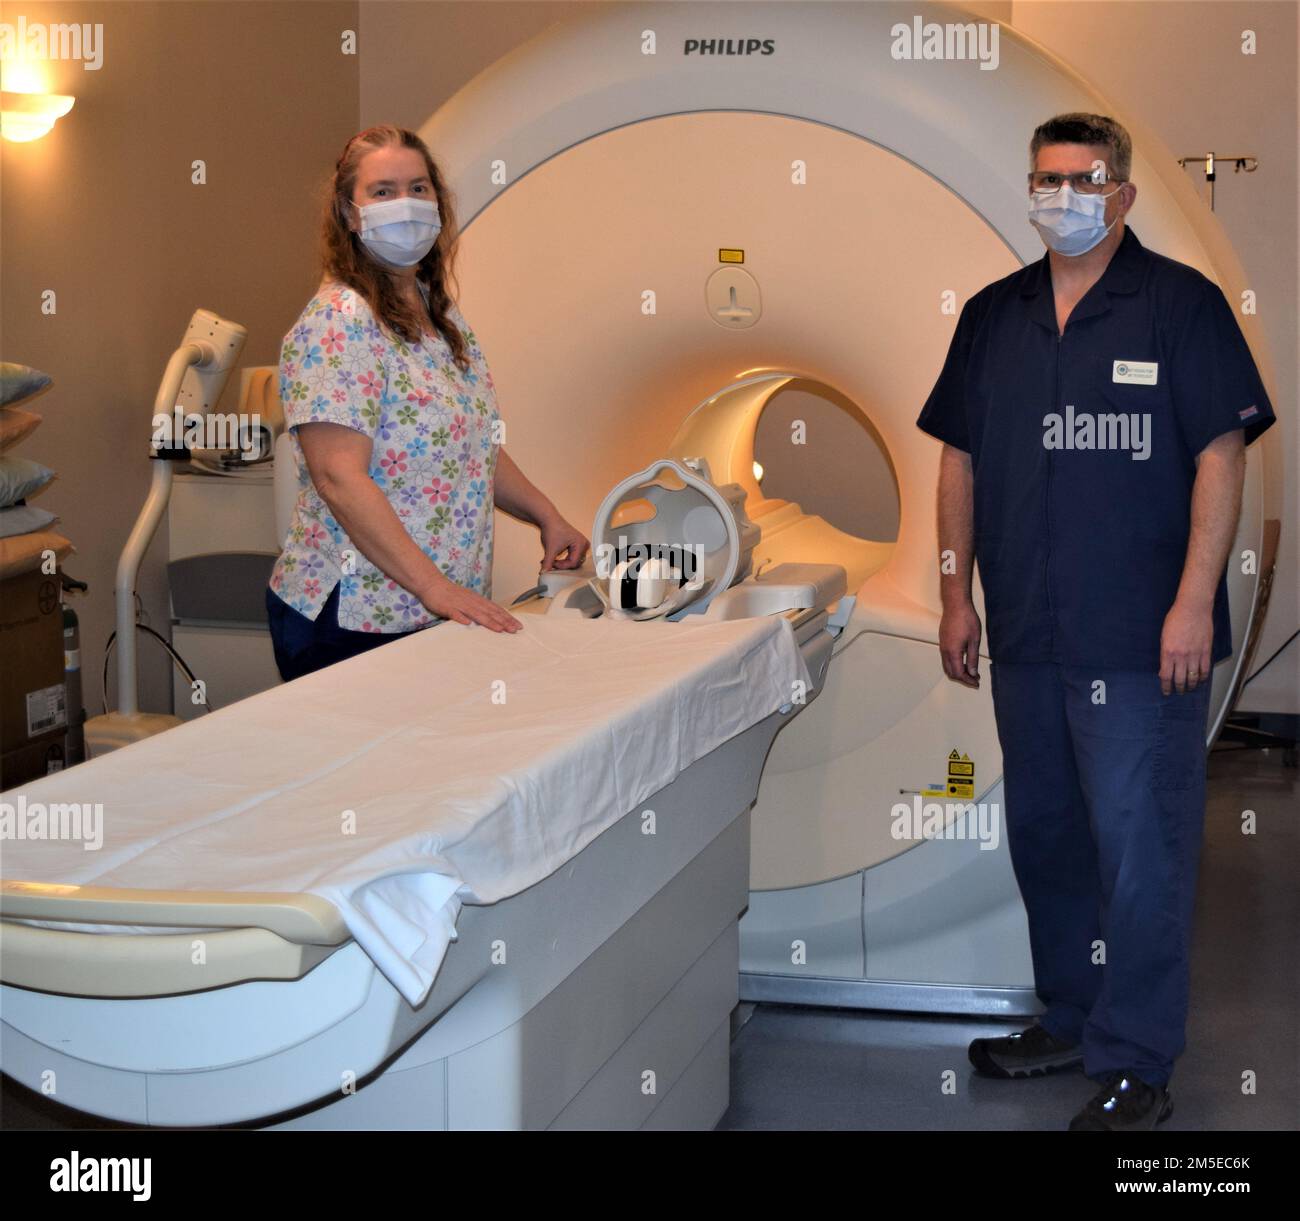 For Naval Hospital Bremerton MRI technologists Ms. Johanna Fanara and Mr. Matthew Hodgson, whether it’s providing timely – and crucial – support to deployed forces in a war zone or providing specialty care for patients at home, the treatment of traumatic brain injuries and concussed patients is a priority. Compiled statistics from the U.S. Centers for Disease Control and Prevention show more than 430,000 service members were diagnosed with TBI from 2000 to 2020, yet the majority were sustained in a non-combat related setting due to training or participating in sporting and leisure activities ( Stock Photo